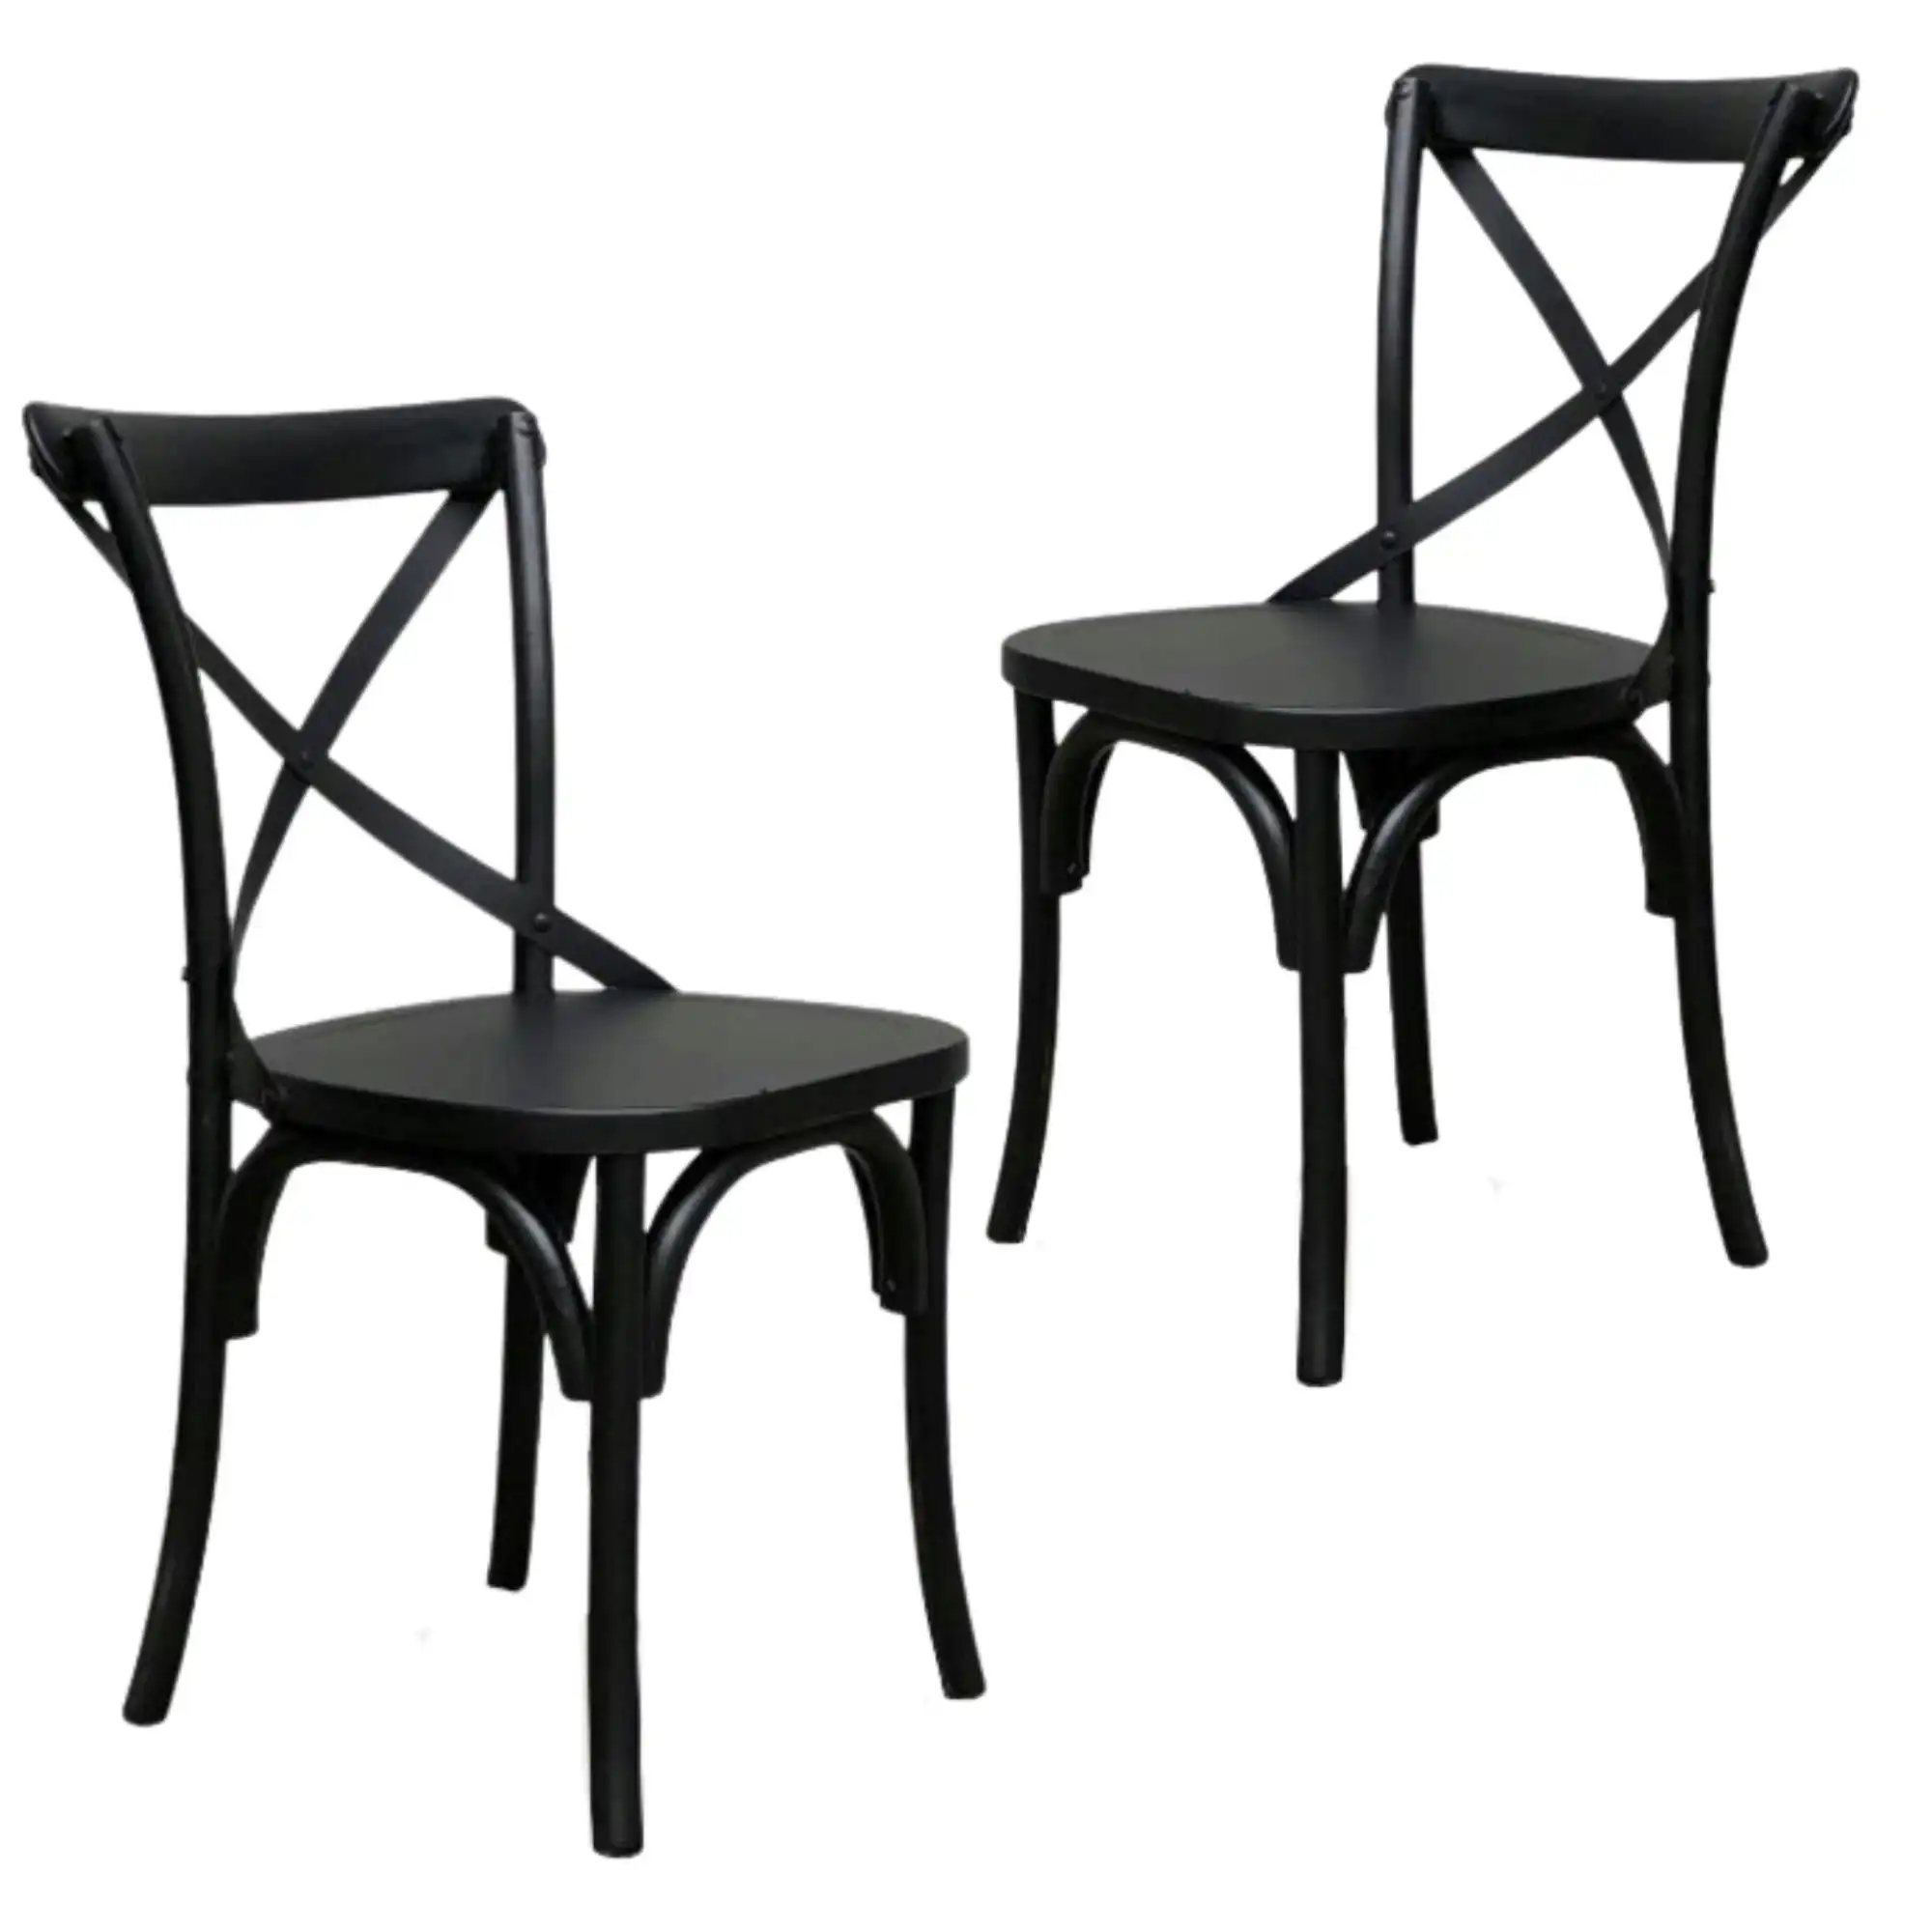 Rustica 2pc Set Dining Chair